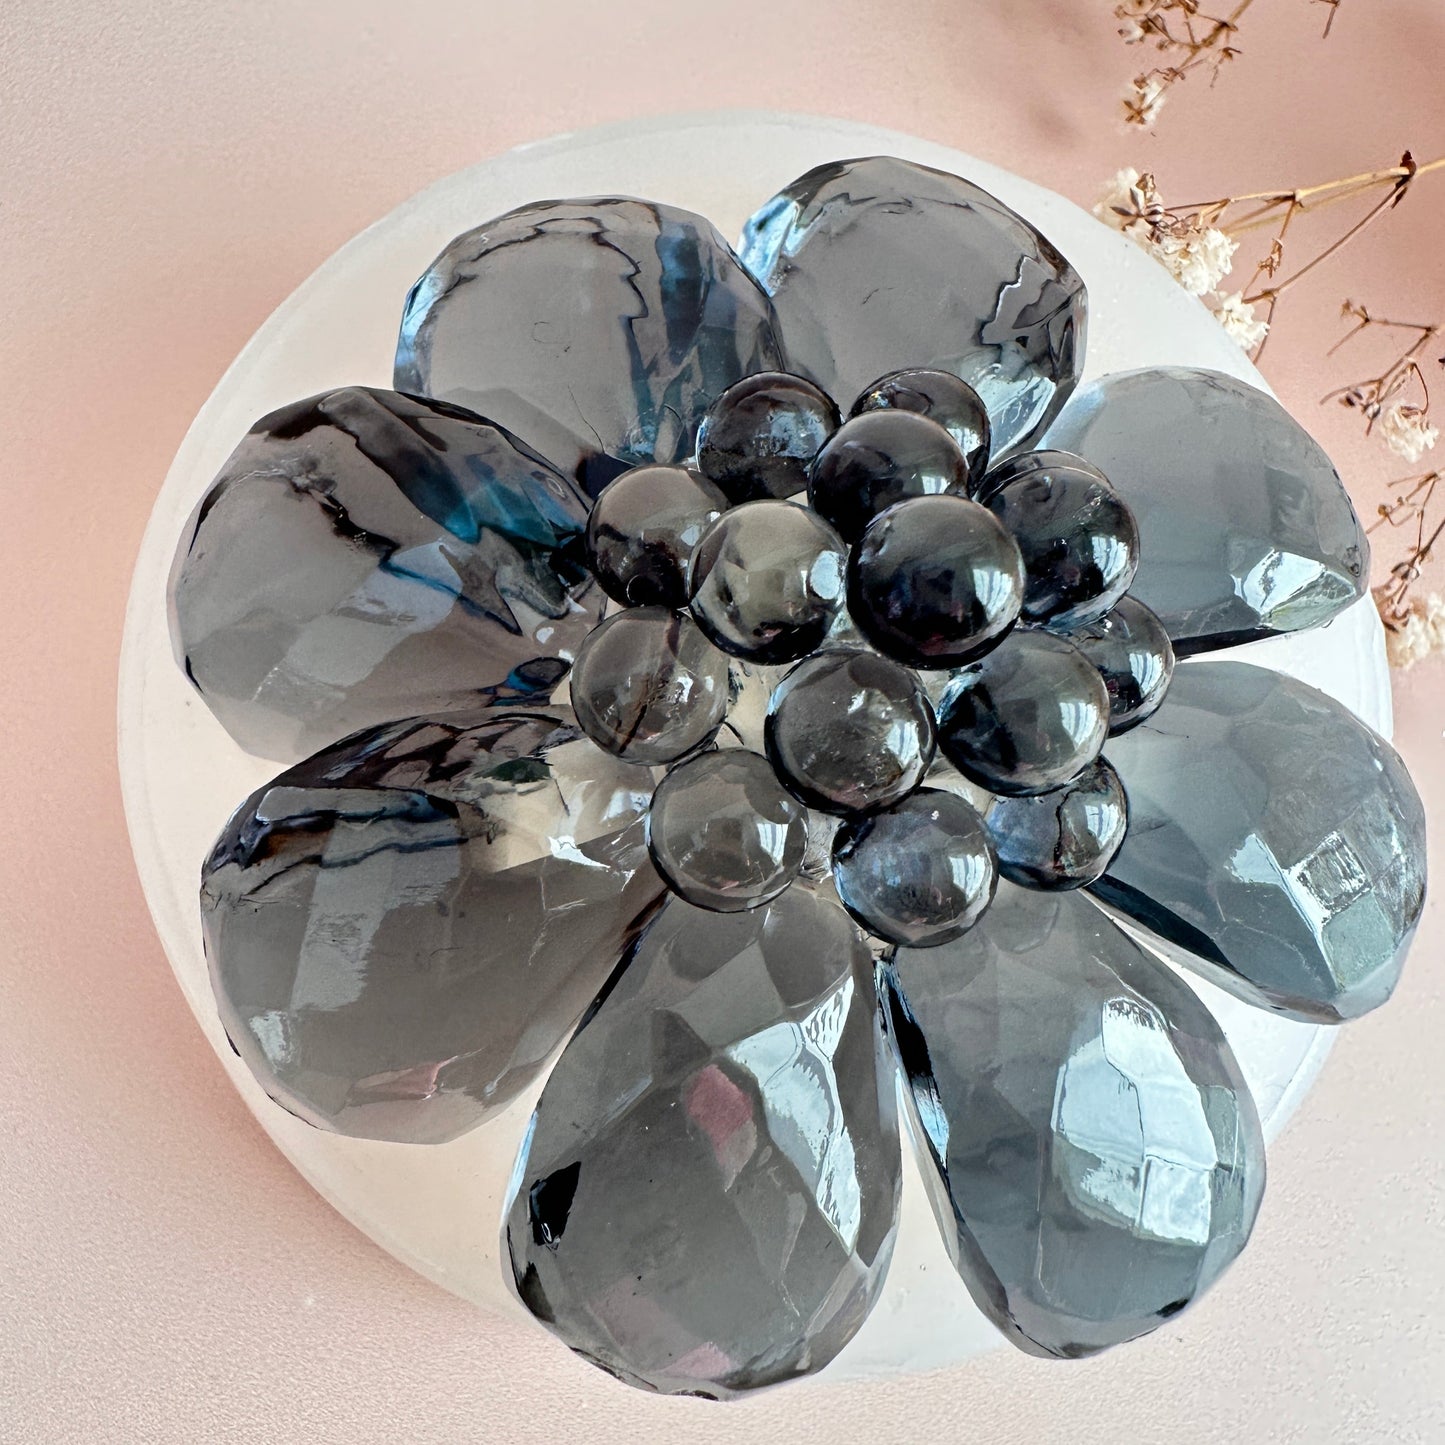 Artistic Delights: Captivating Large Crystal Flower Silicone Mold with Bubbles